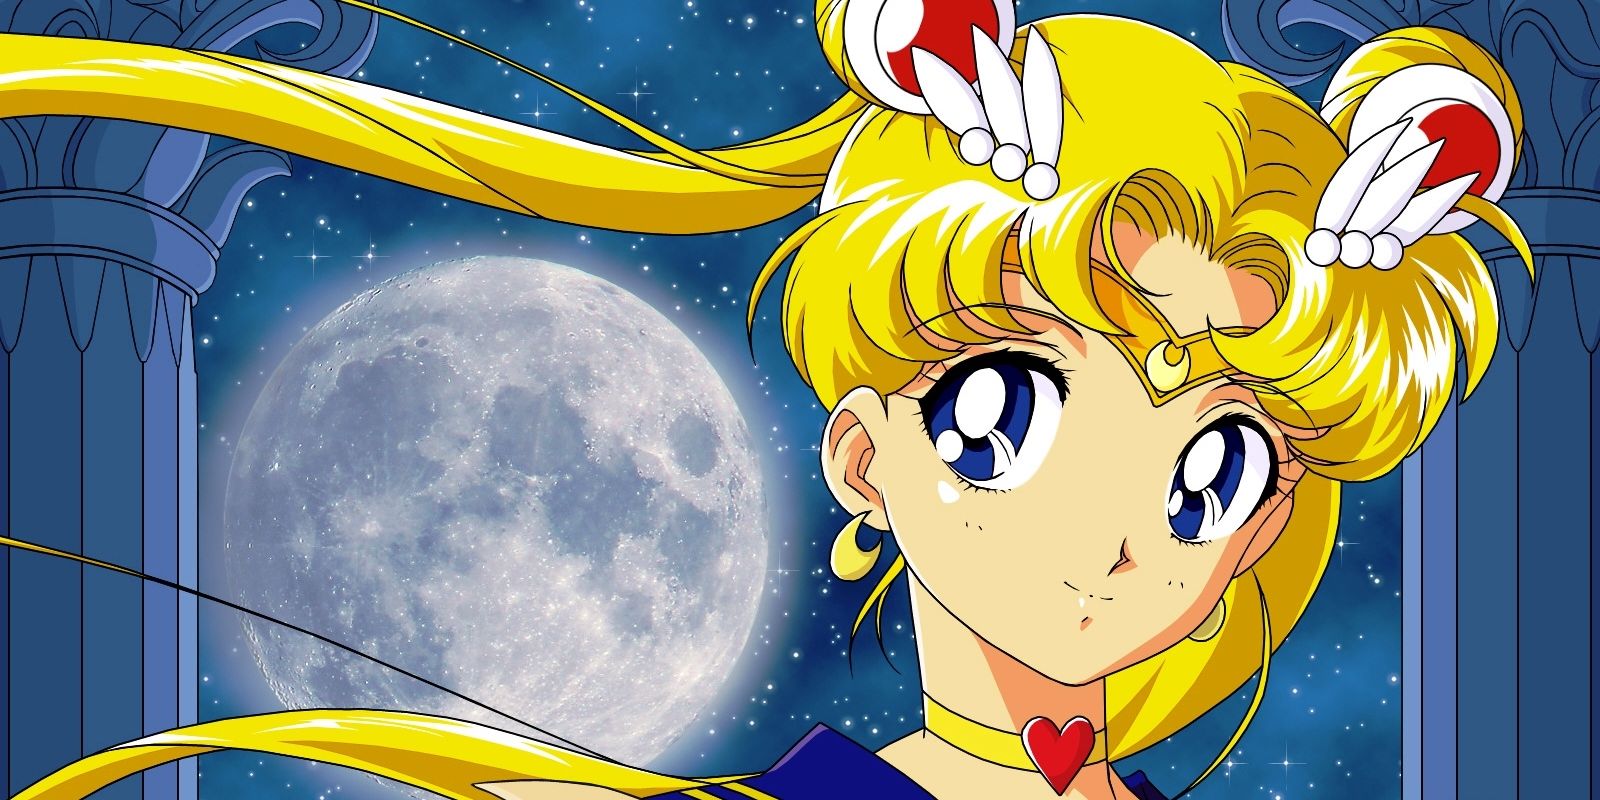 Usagi in Sailor Moon form standing next to moon